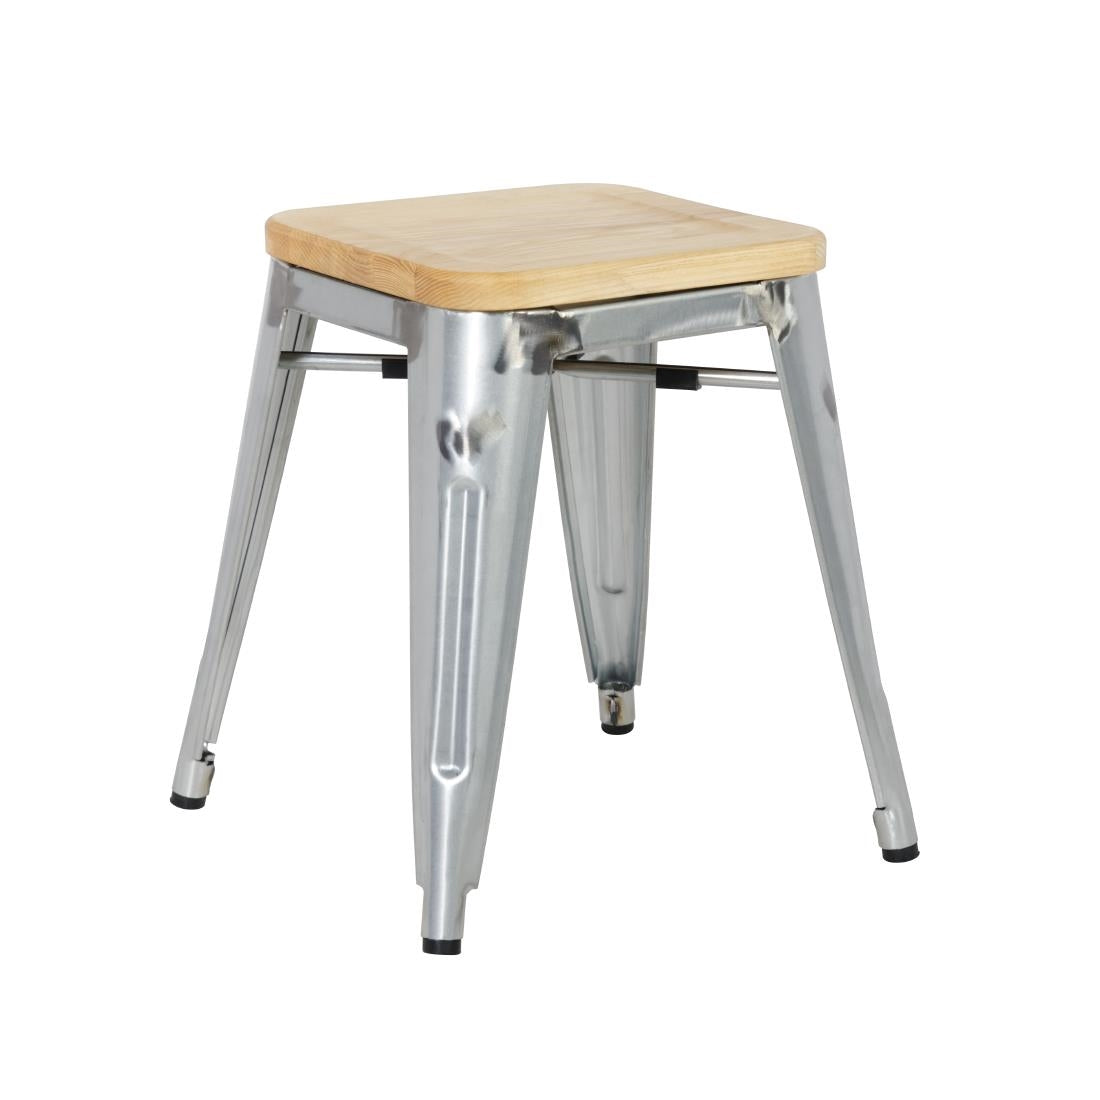 GM634 Bolero Bistro Low Stools with Wooden Seat Pad Galvanised Steel (Pack of 4) JD Catering Equipment Solutions Ltd